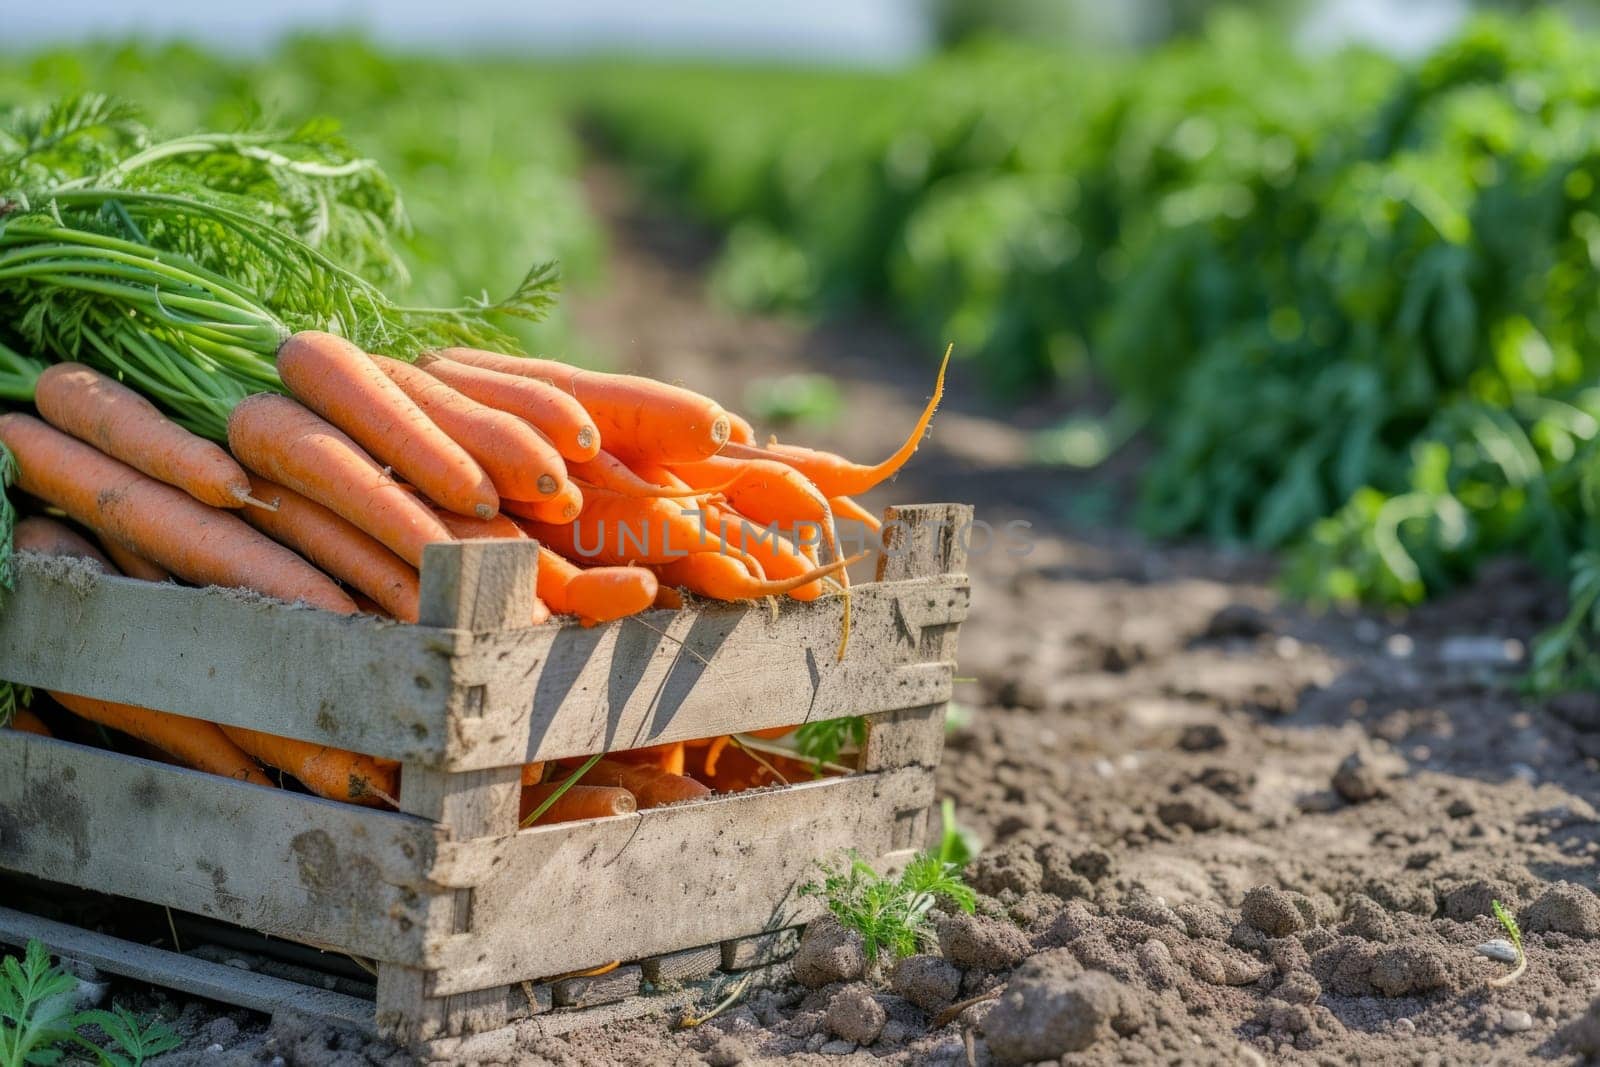 A crate of fresh carrots in a harvest area.